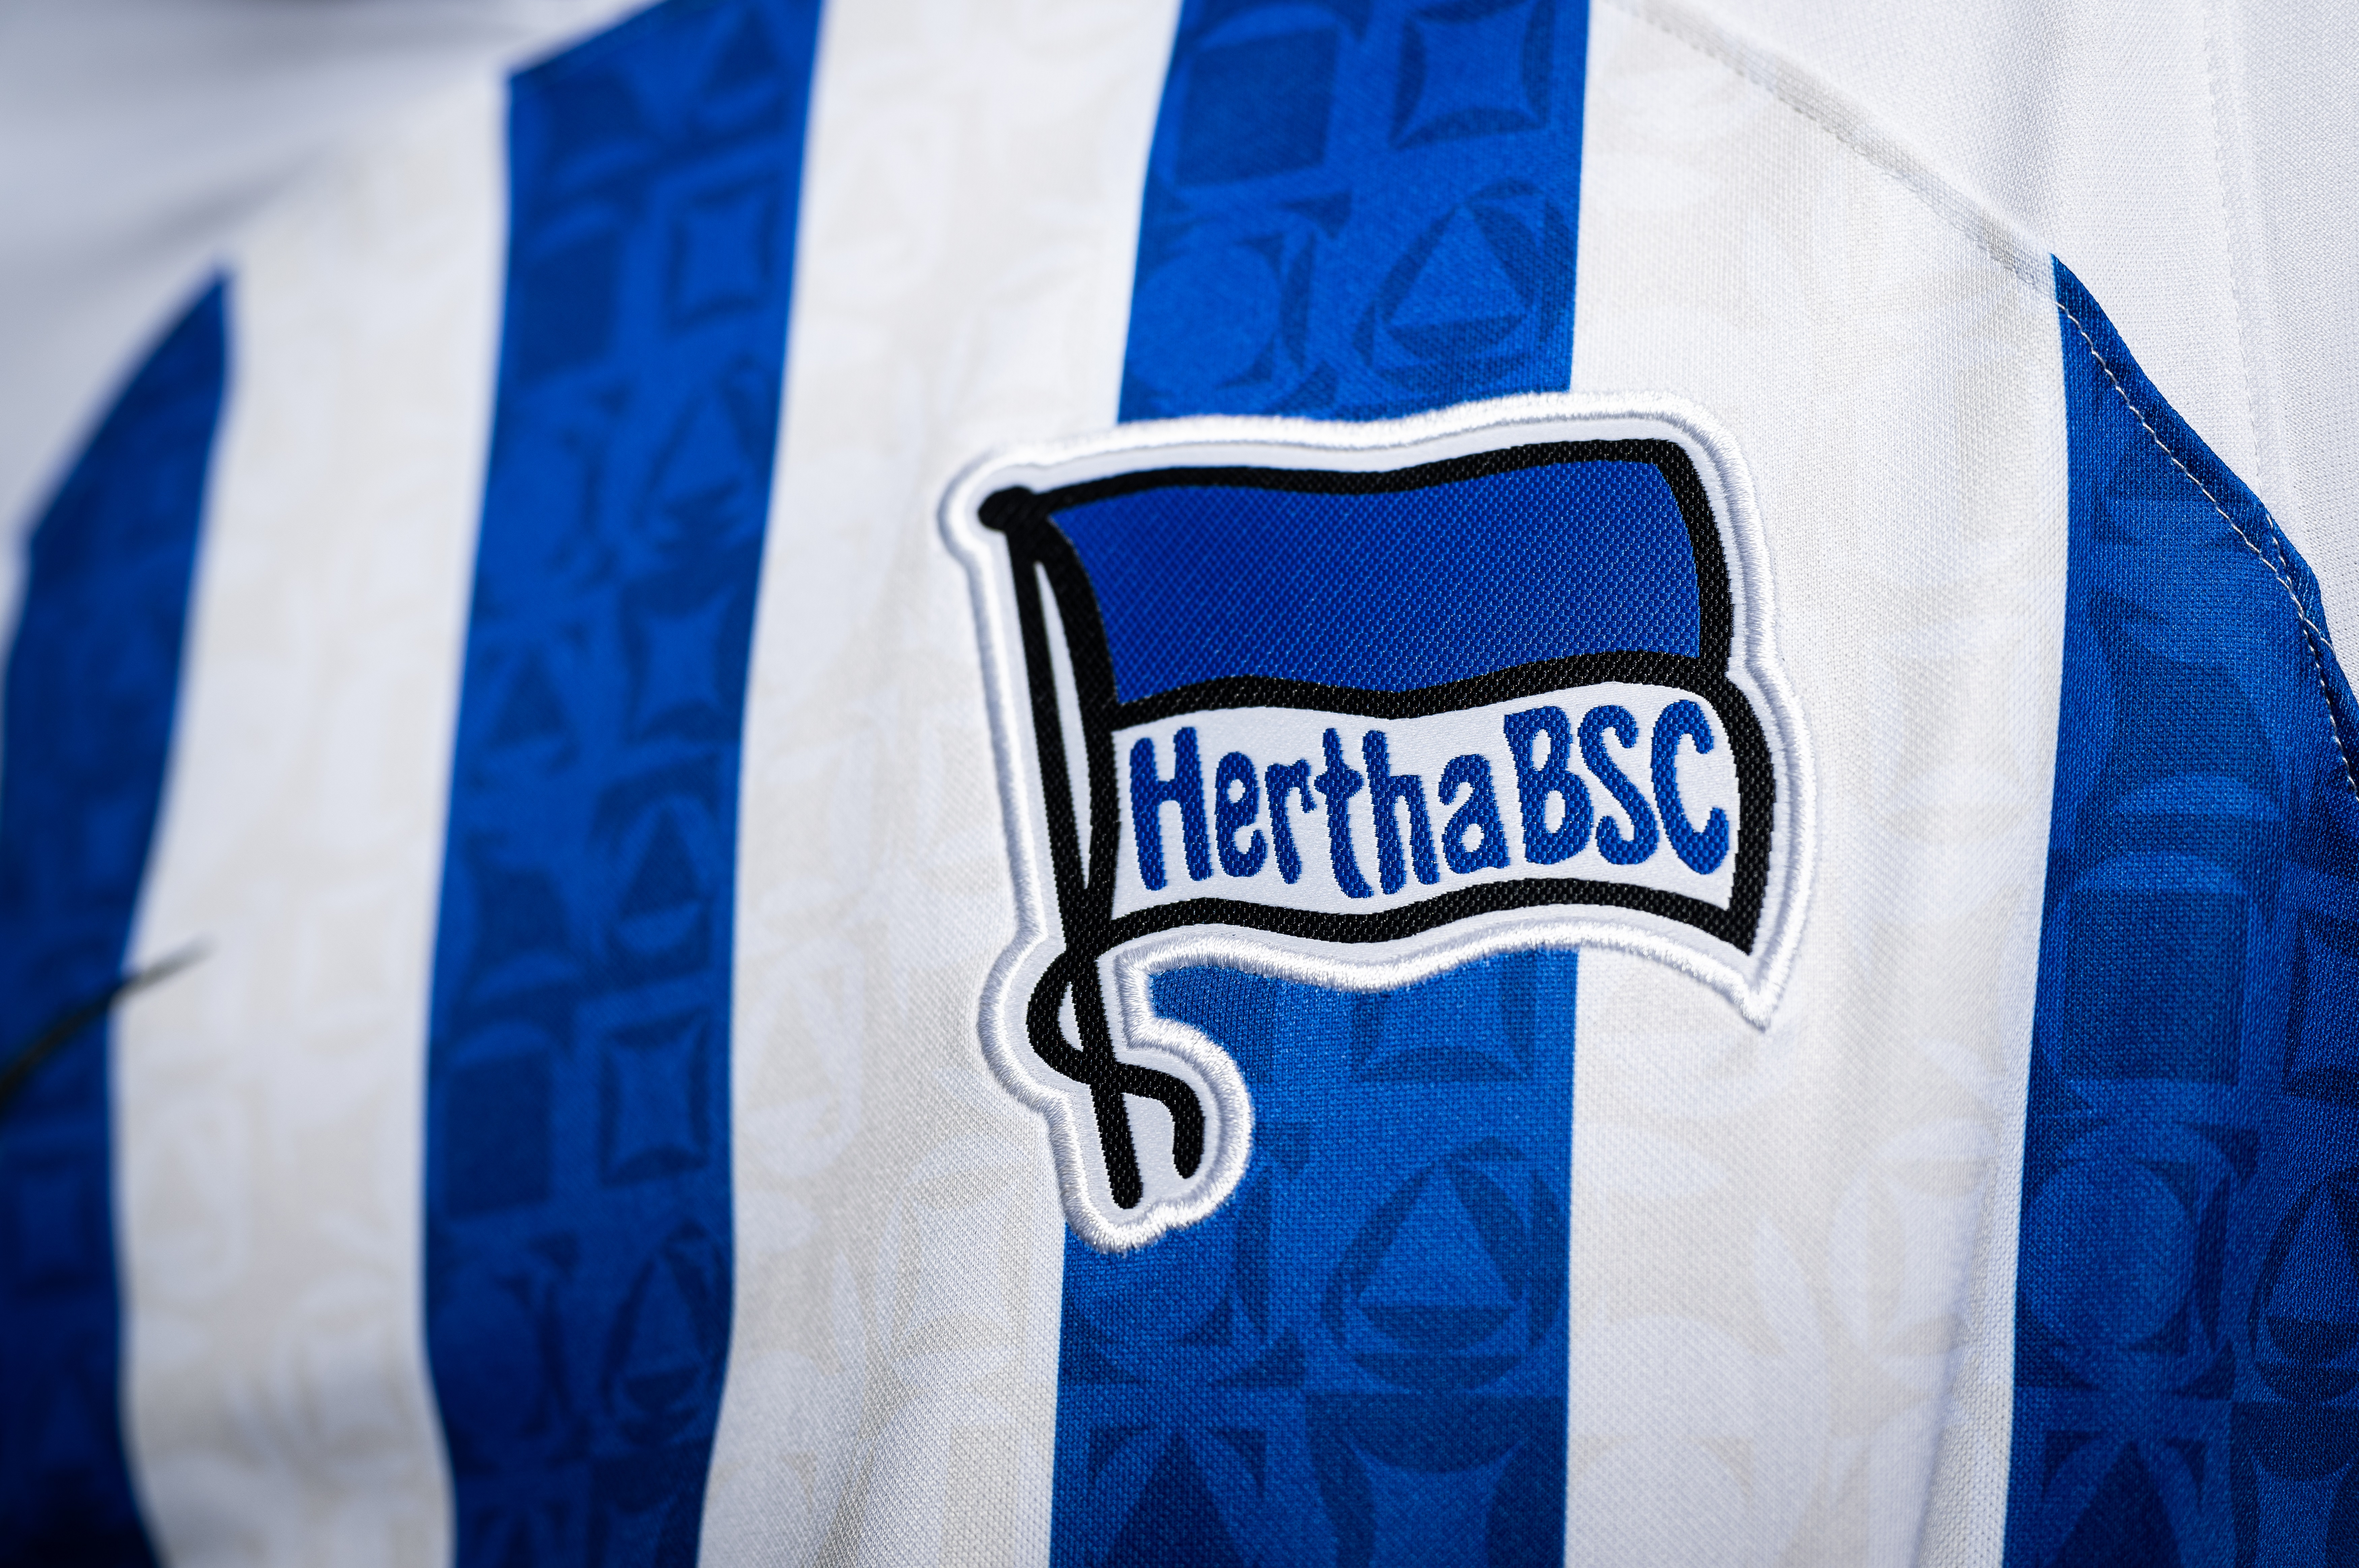 Hertha's logo on the blue and white 2022/23 home shirt.